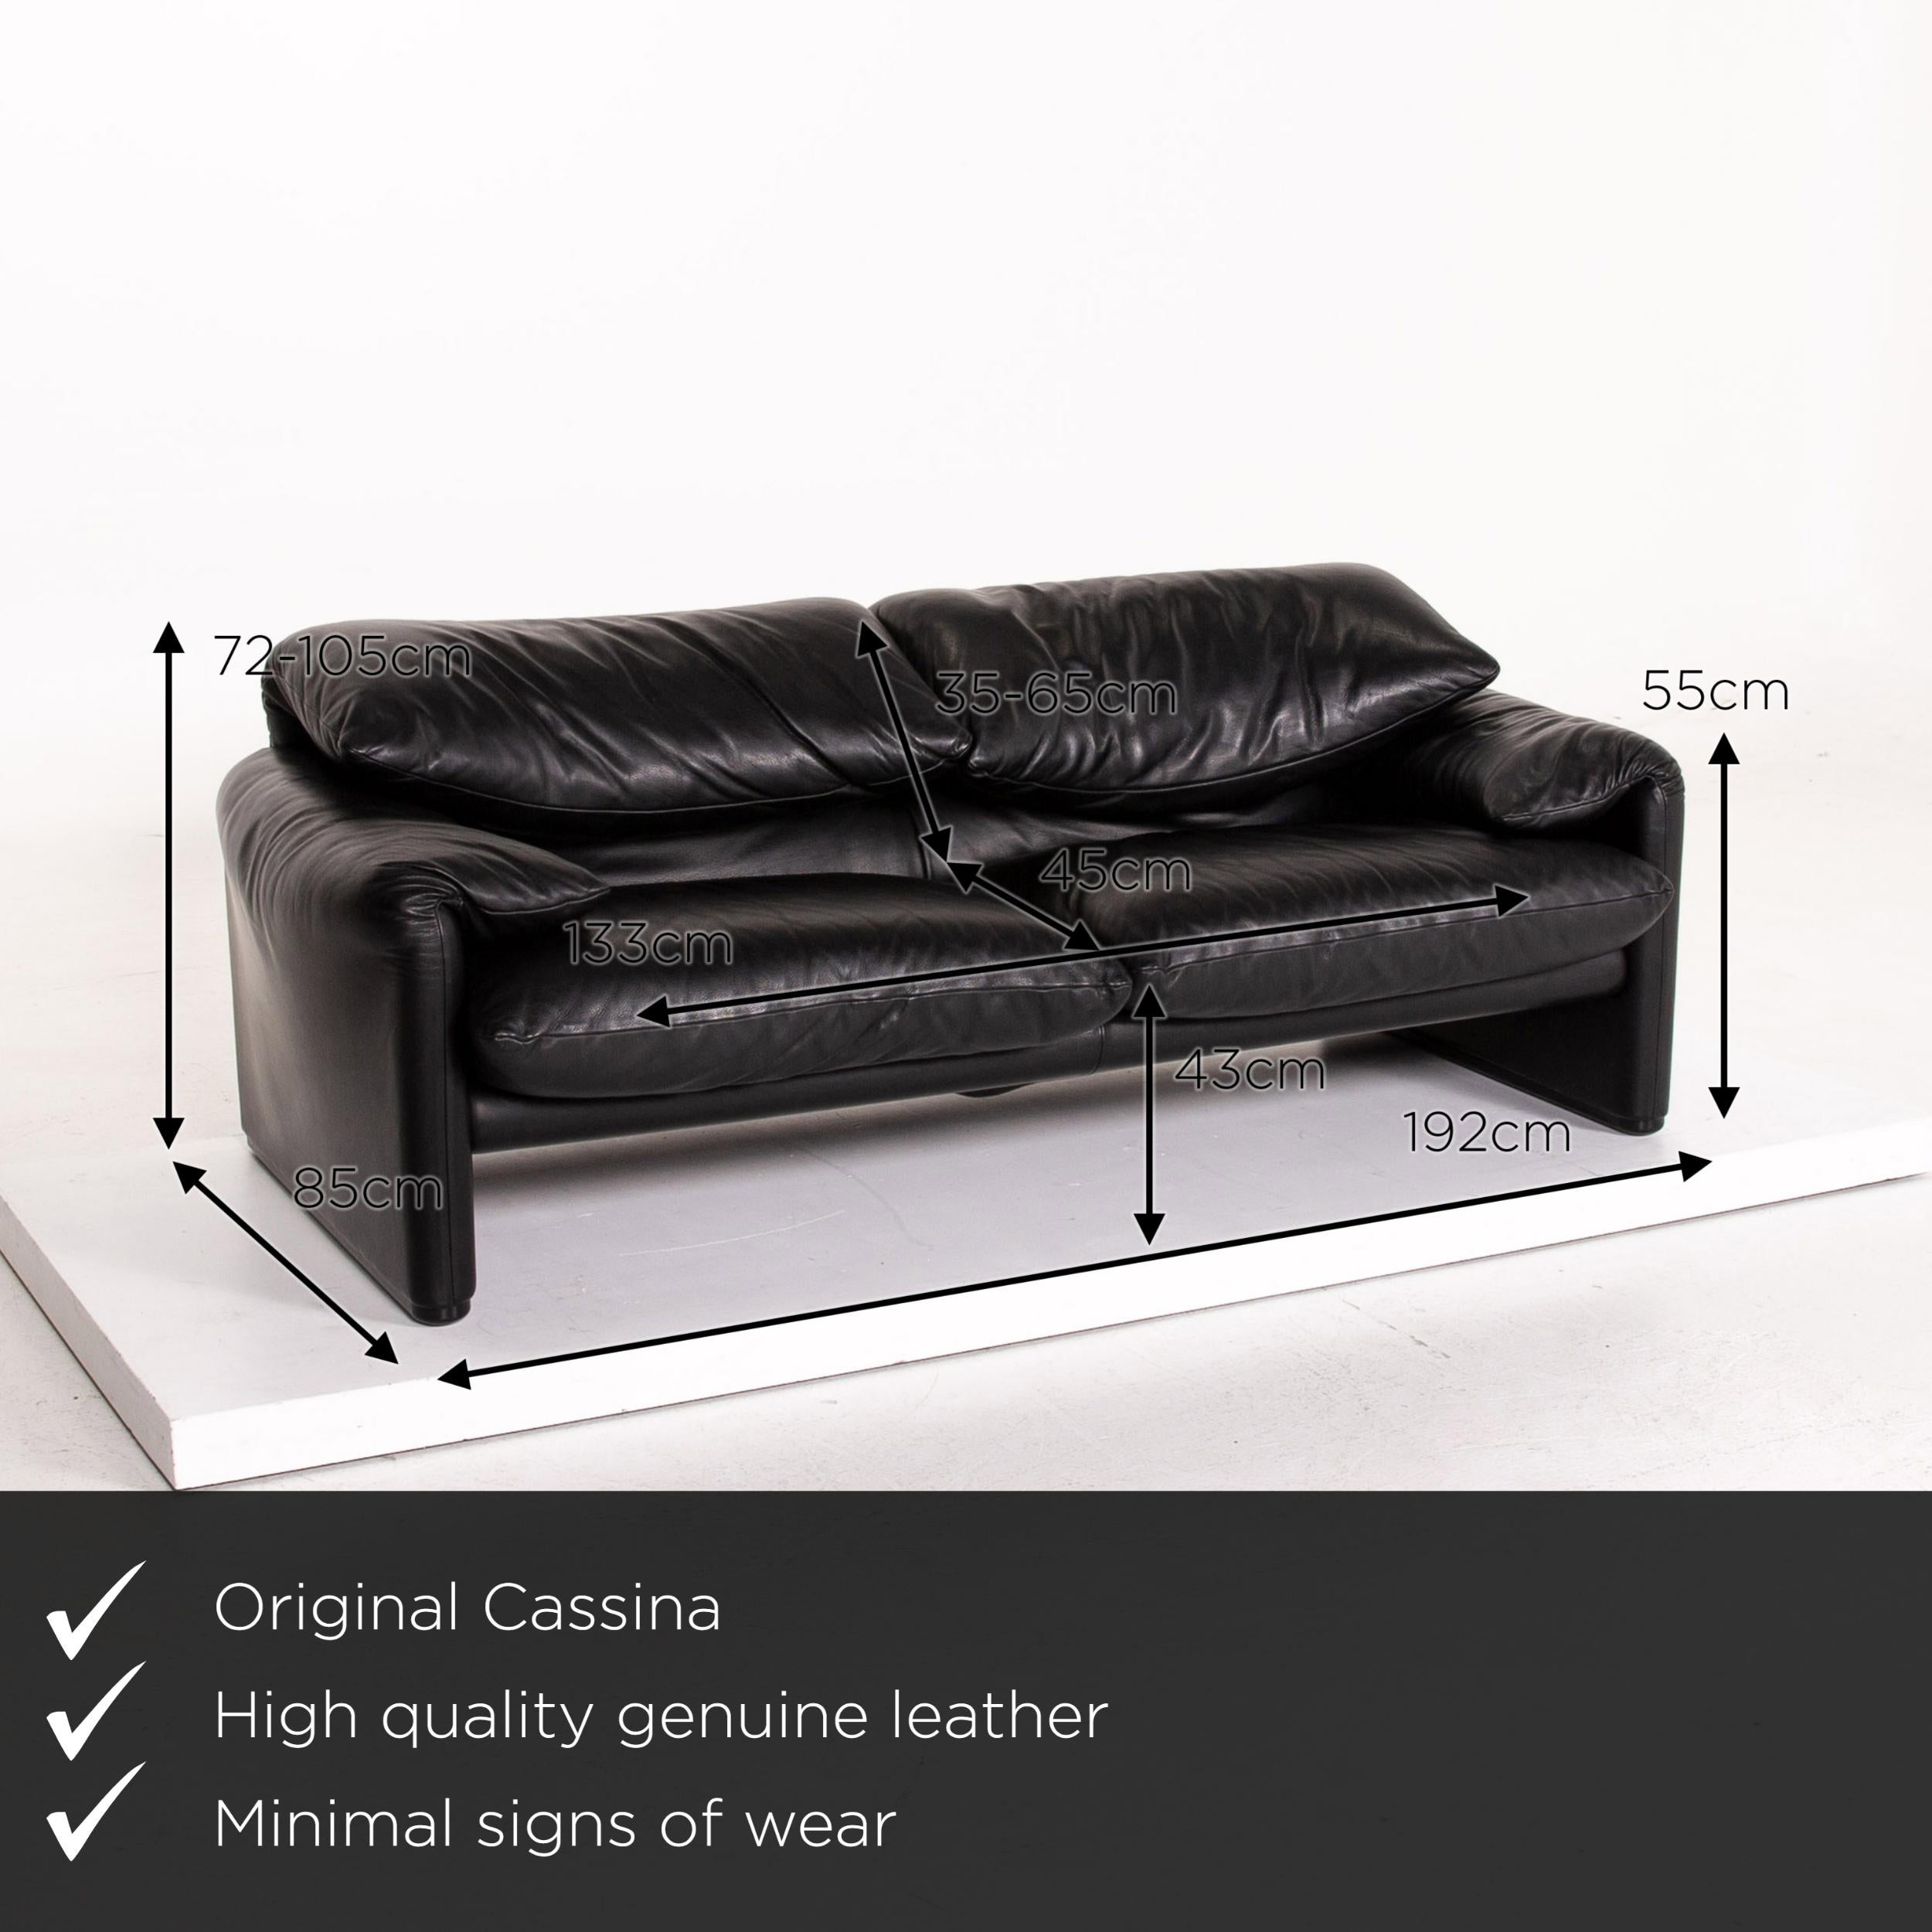 We present to you a Cassina Maralunga leather sofa black three-seat function couch.

 

 Product measurements in centimeters:
 

Depth 85
Width 192
Height 72
Seat height 43
Rest height 55
Seat depth 45
Seat width 133
Back height 35.